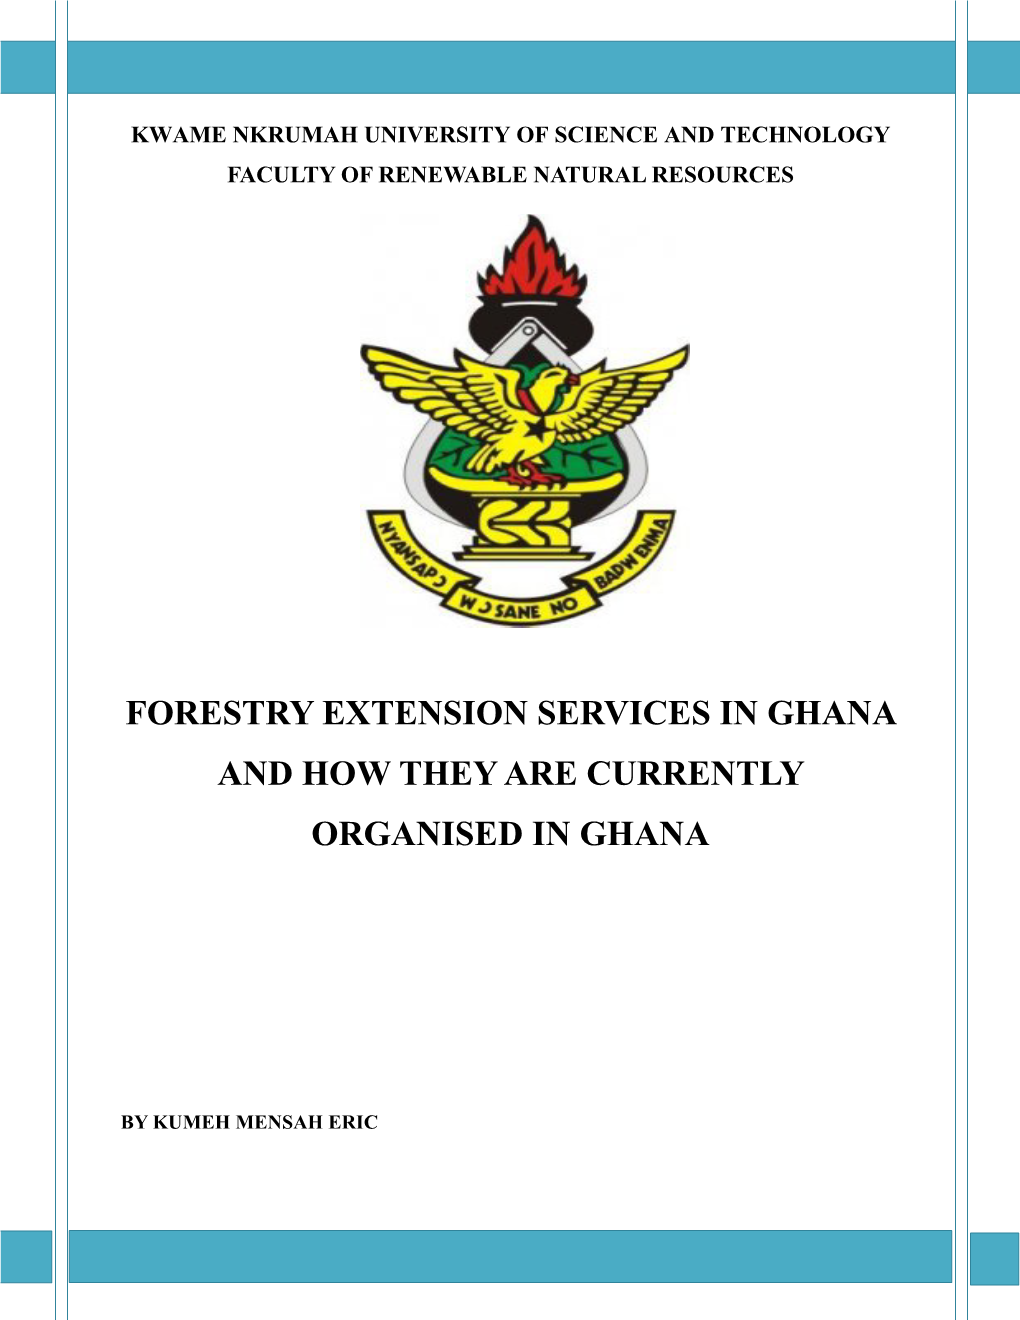 Forestry Extension Services in Ghana and How They Are Currently Organised in Ghana